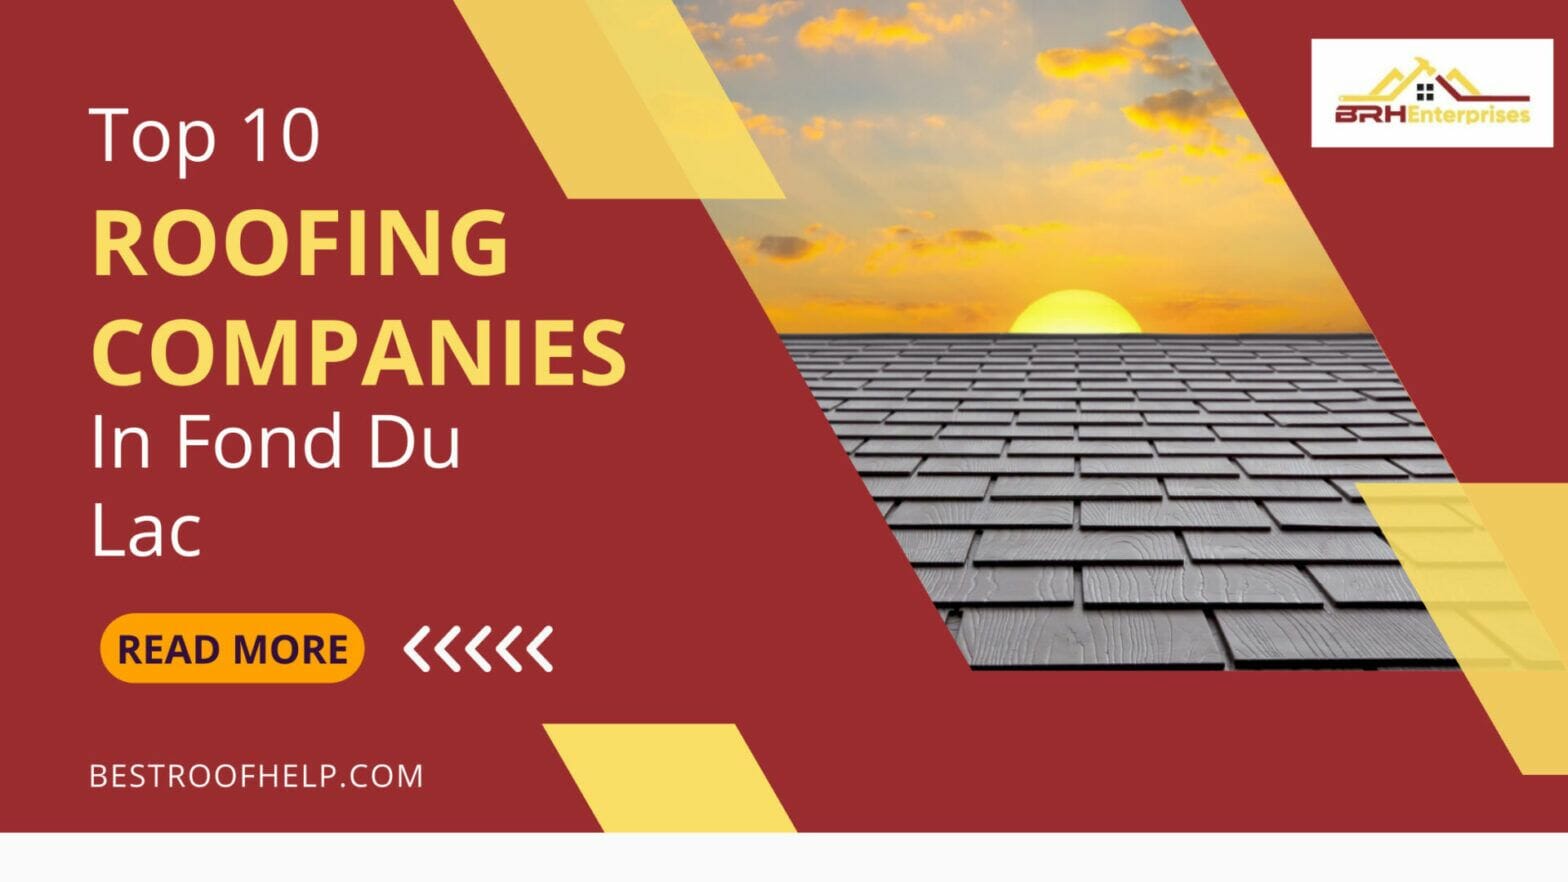 Top 10 Roofing Companies In Fond Du Lac, WI (And their contact info)